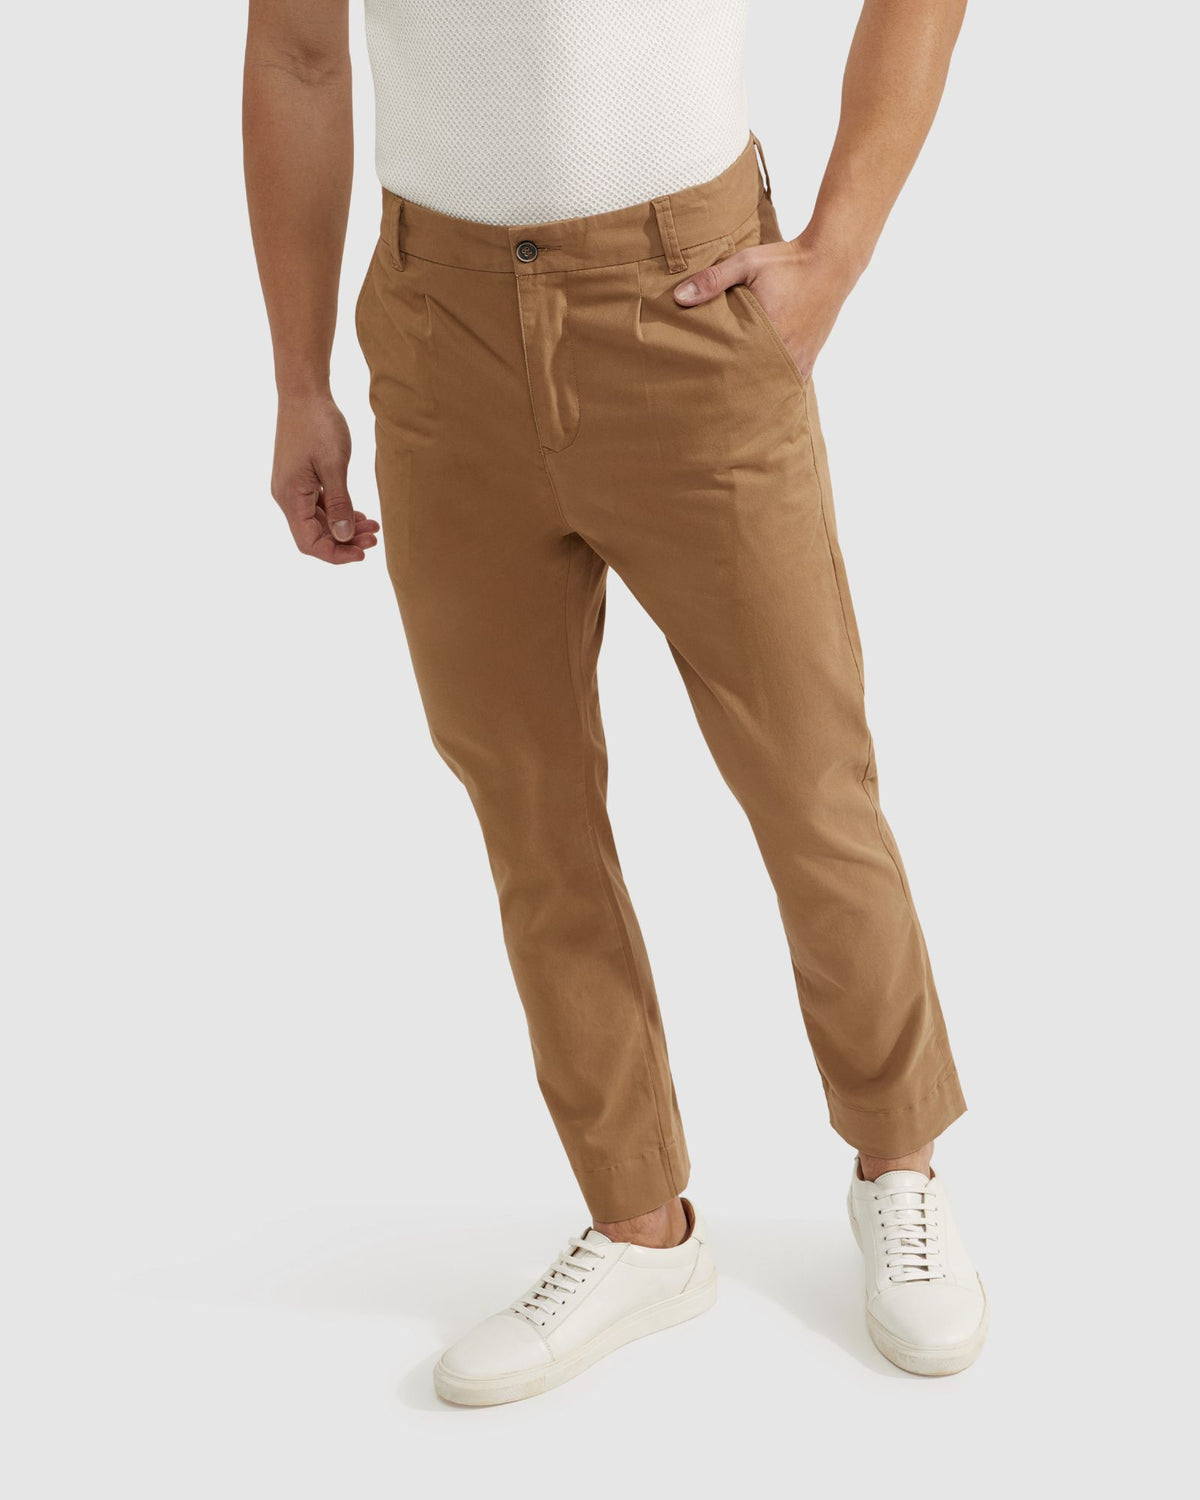 RYAN ORGANIC COTTON FOLDED CUFF CHINOS - AVAILABLE ~ 1-2 weeks MENS TROUSERS